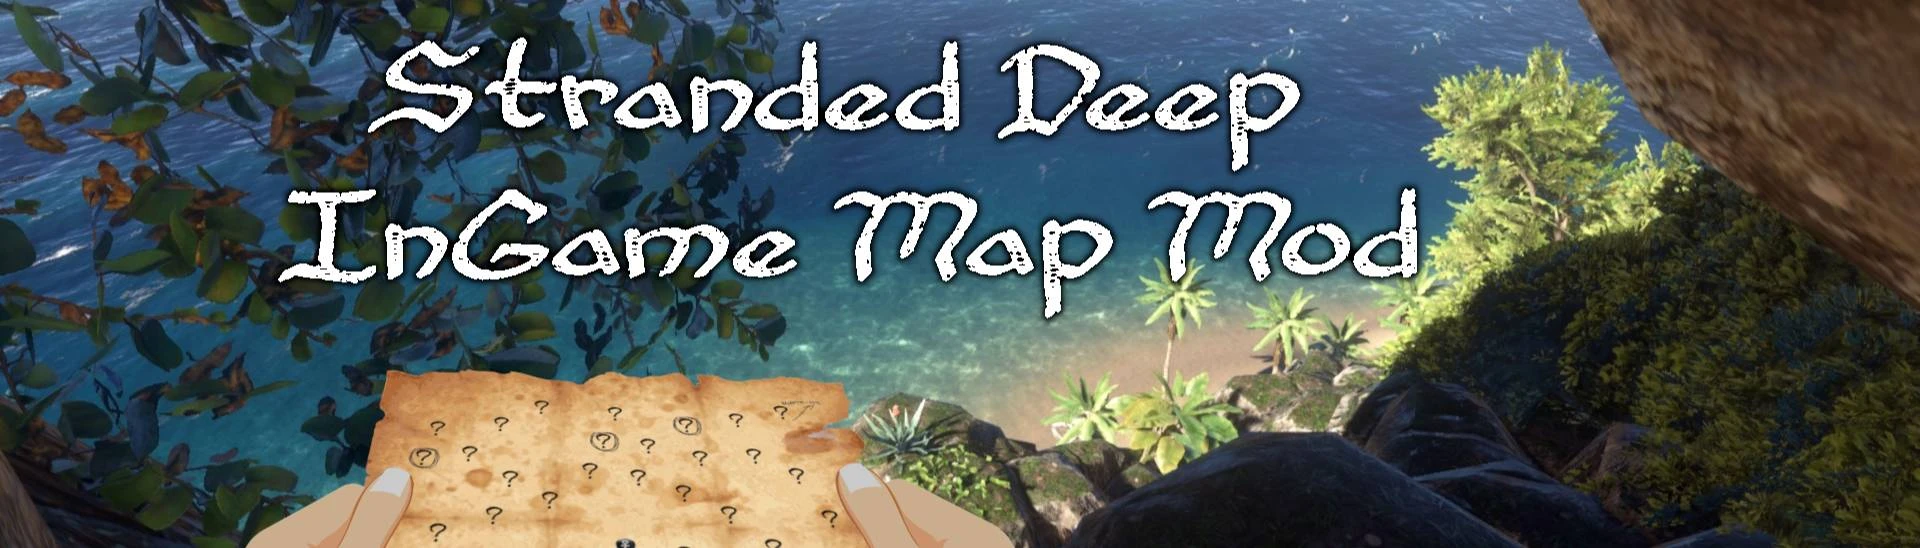 Free Maps, Mods and Tools for Games! 